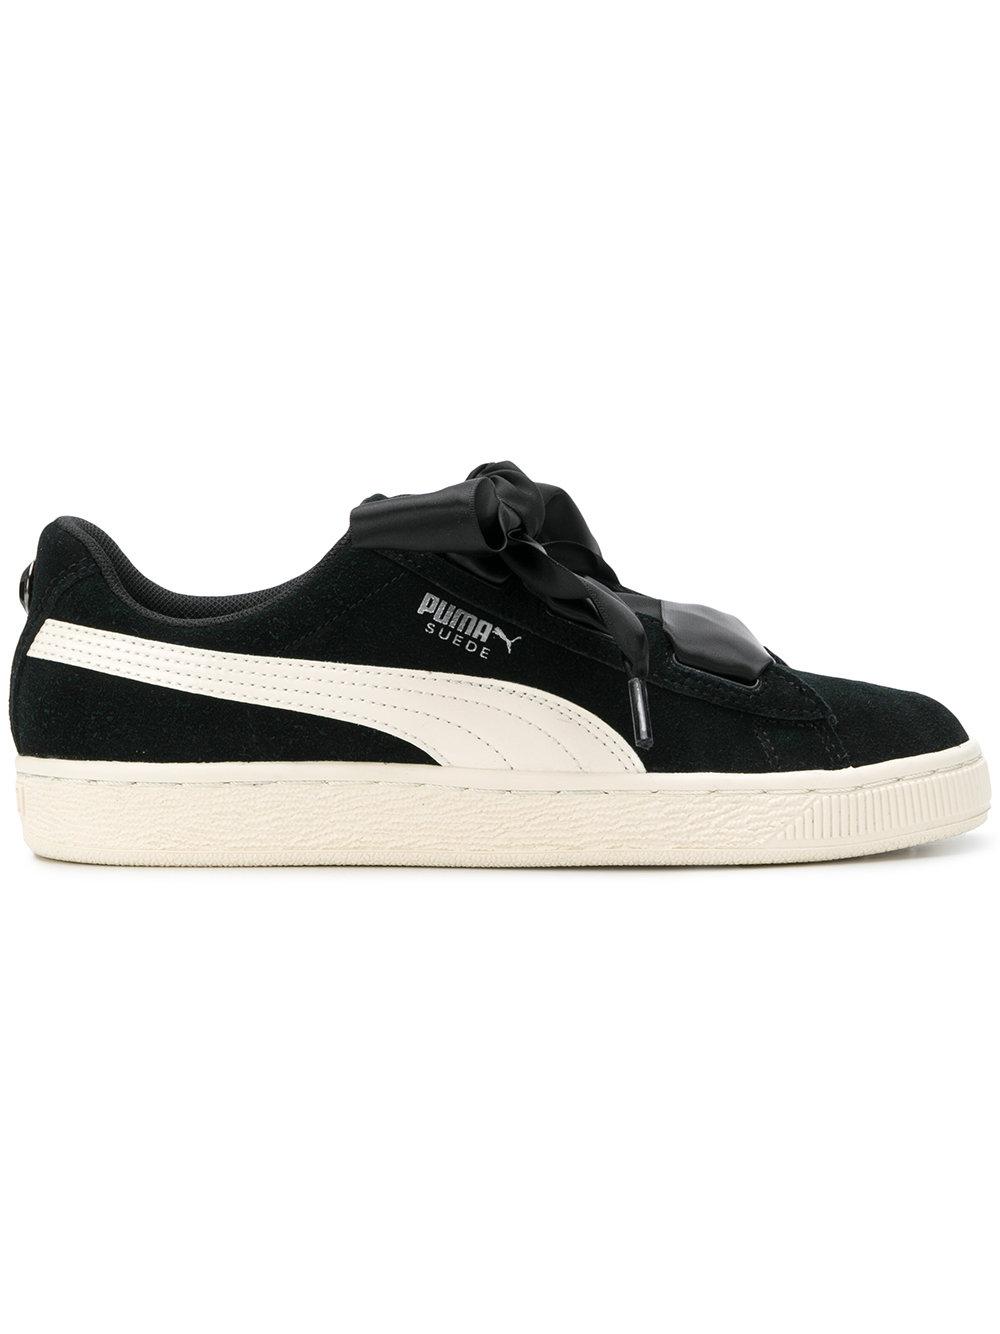 PUMA Suede Ribbon Lace-up Sneakers in Black | Lyst Australia